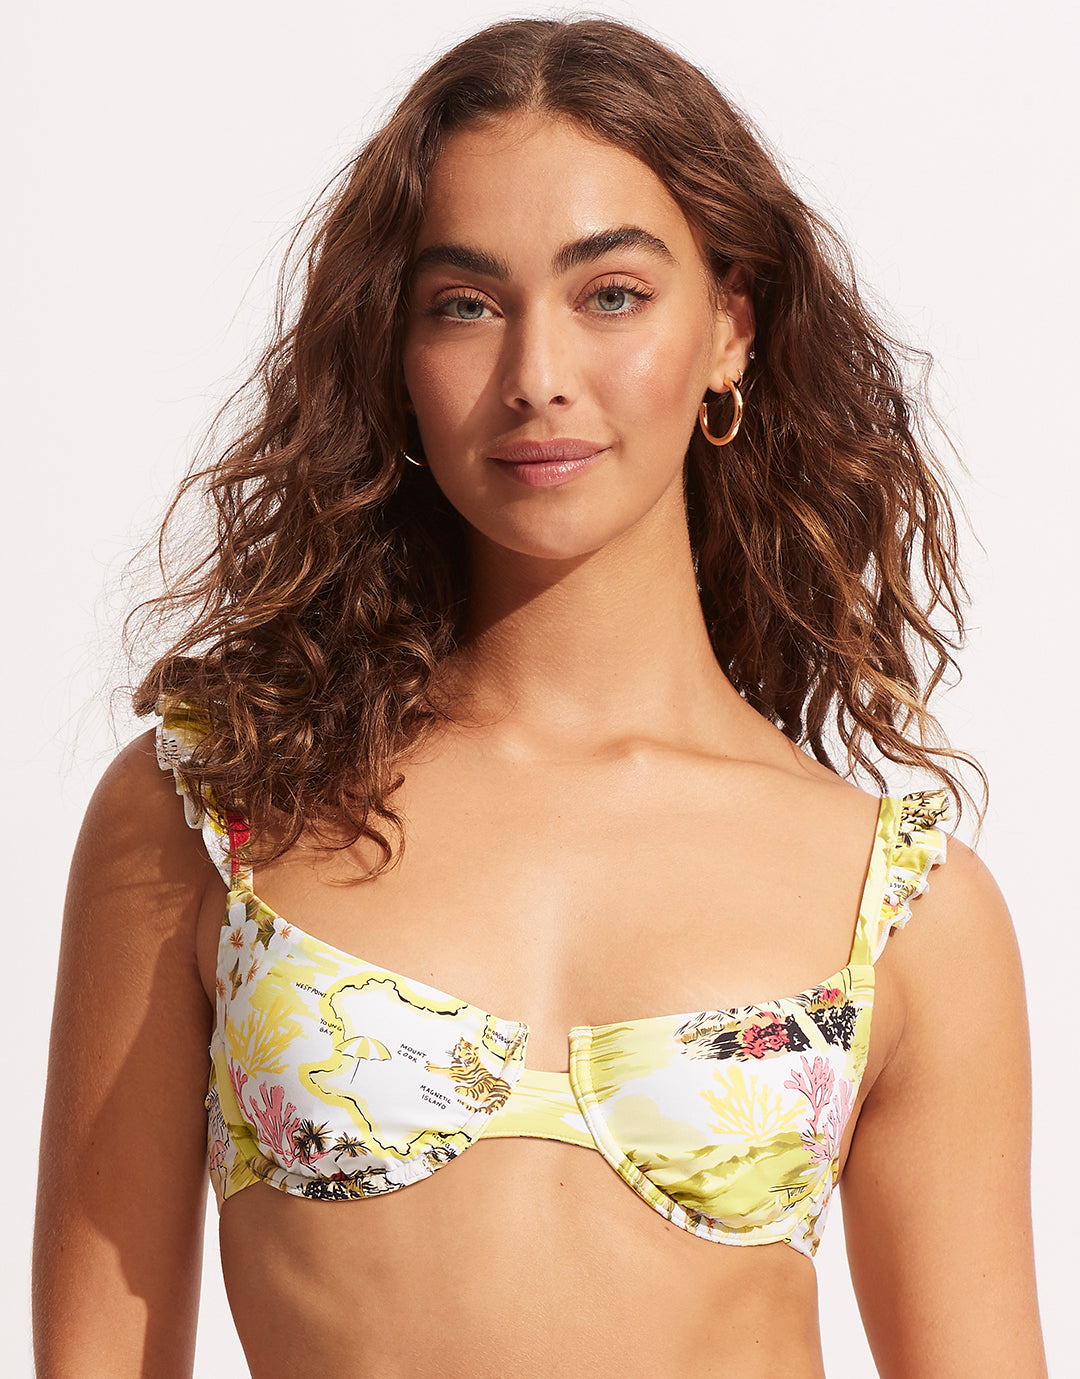 The Best Bikini Tops for Small Busts